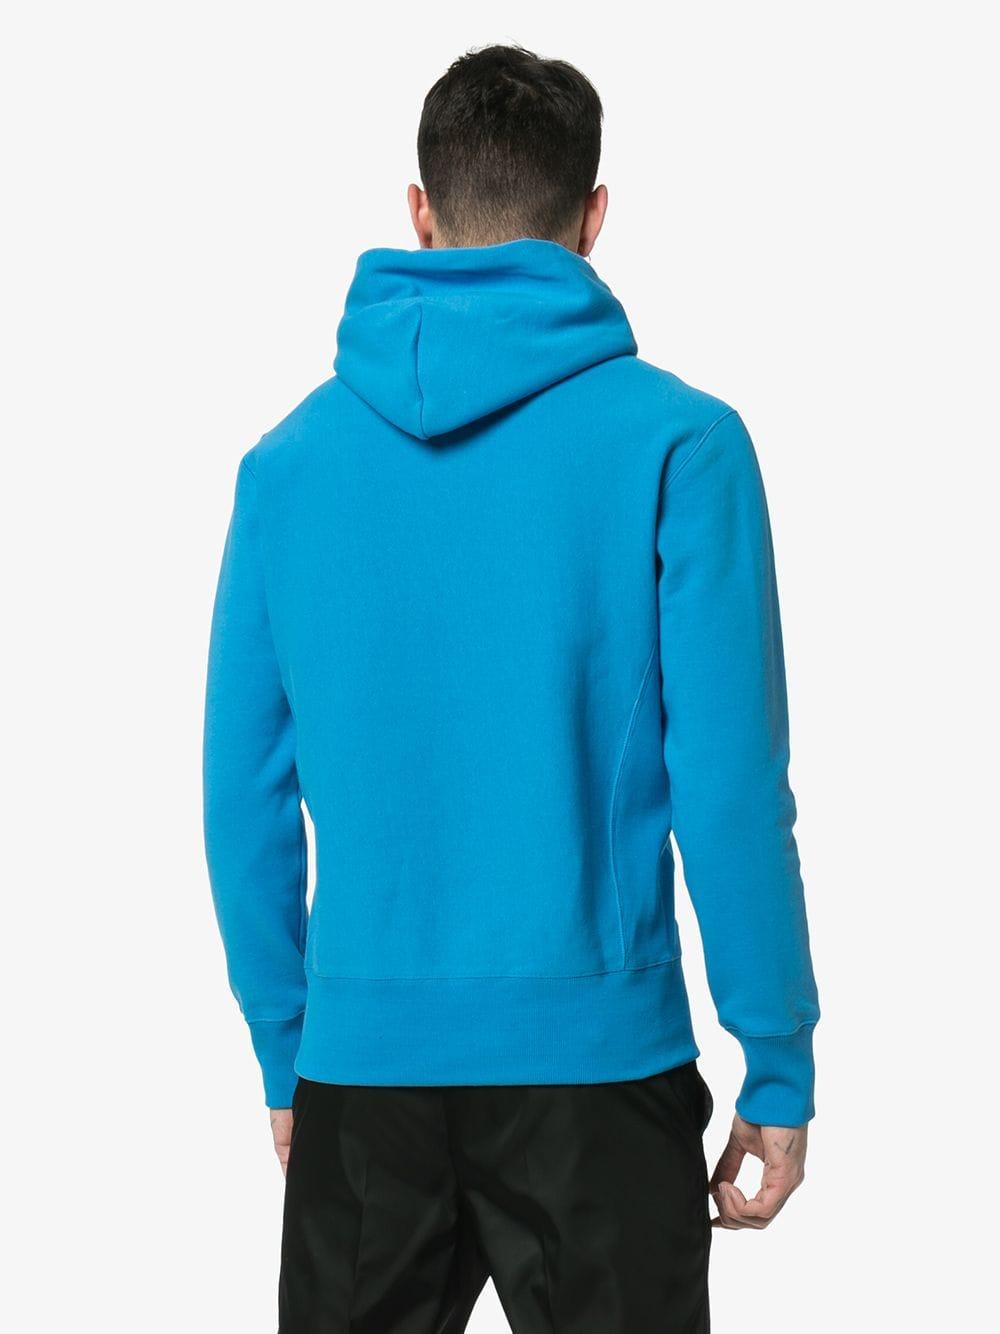 Champion Logo Embroidered Hooded Cotton Jumper in Blue for Men - Lyst